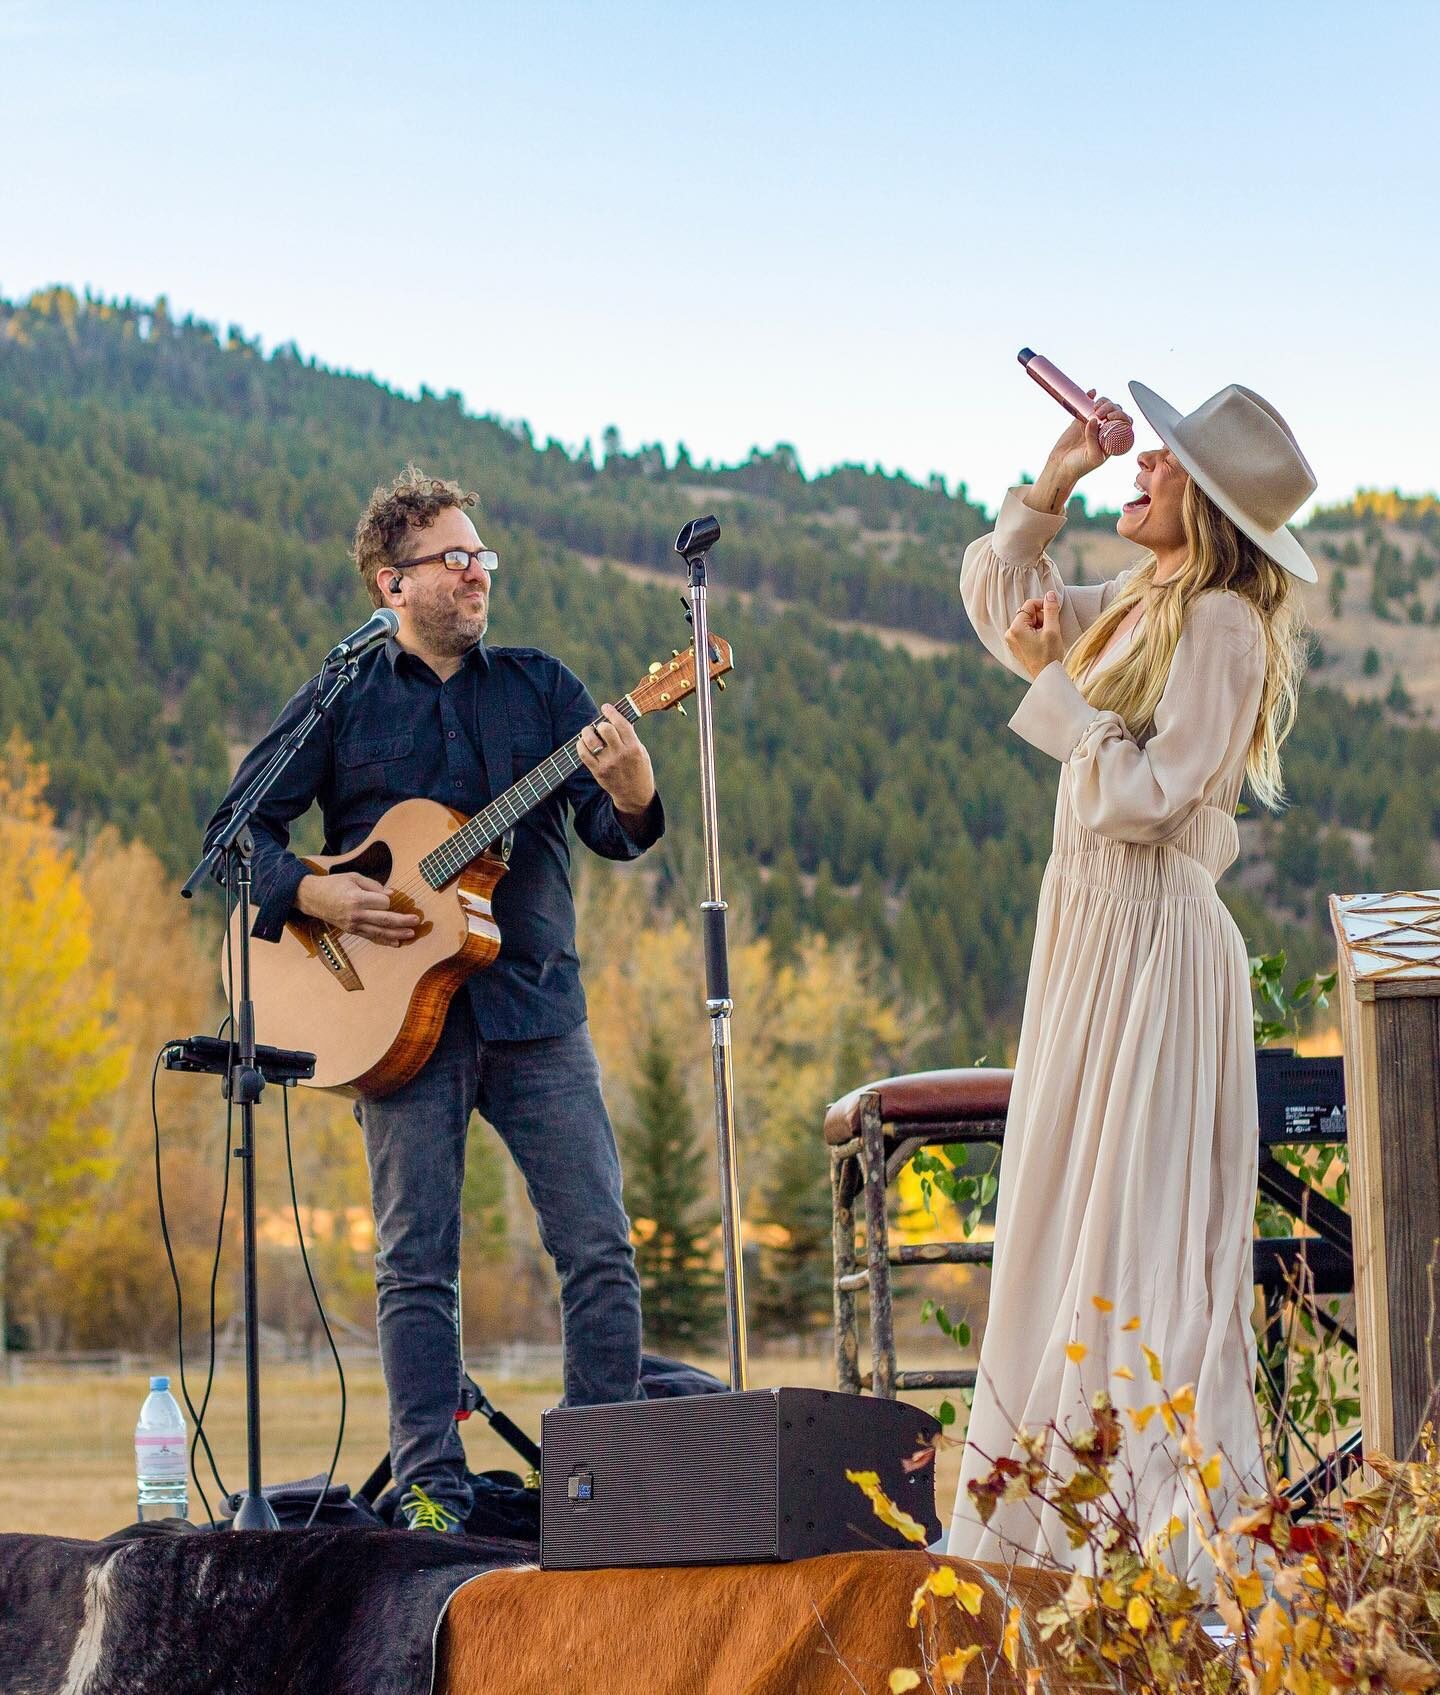 A local artist performs at The Ranch on the Lewis and Clark National Historic Trail